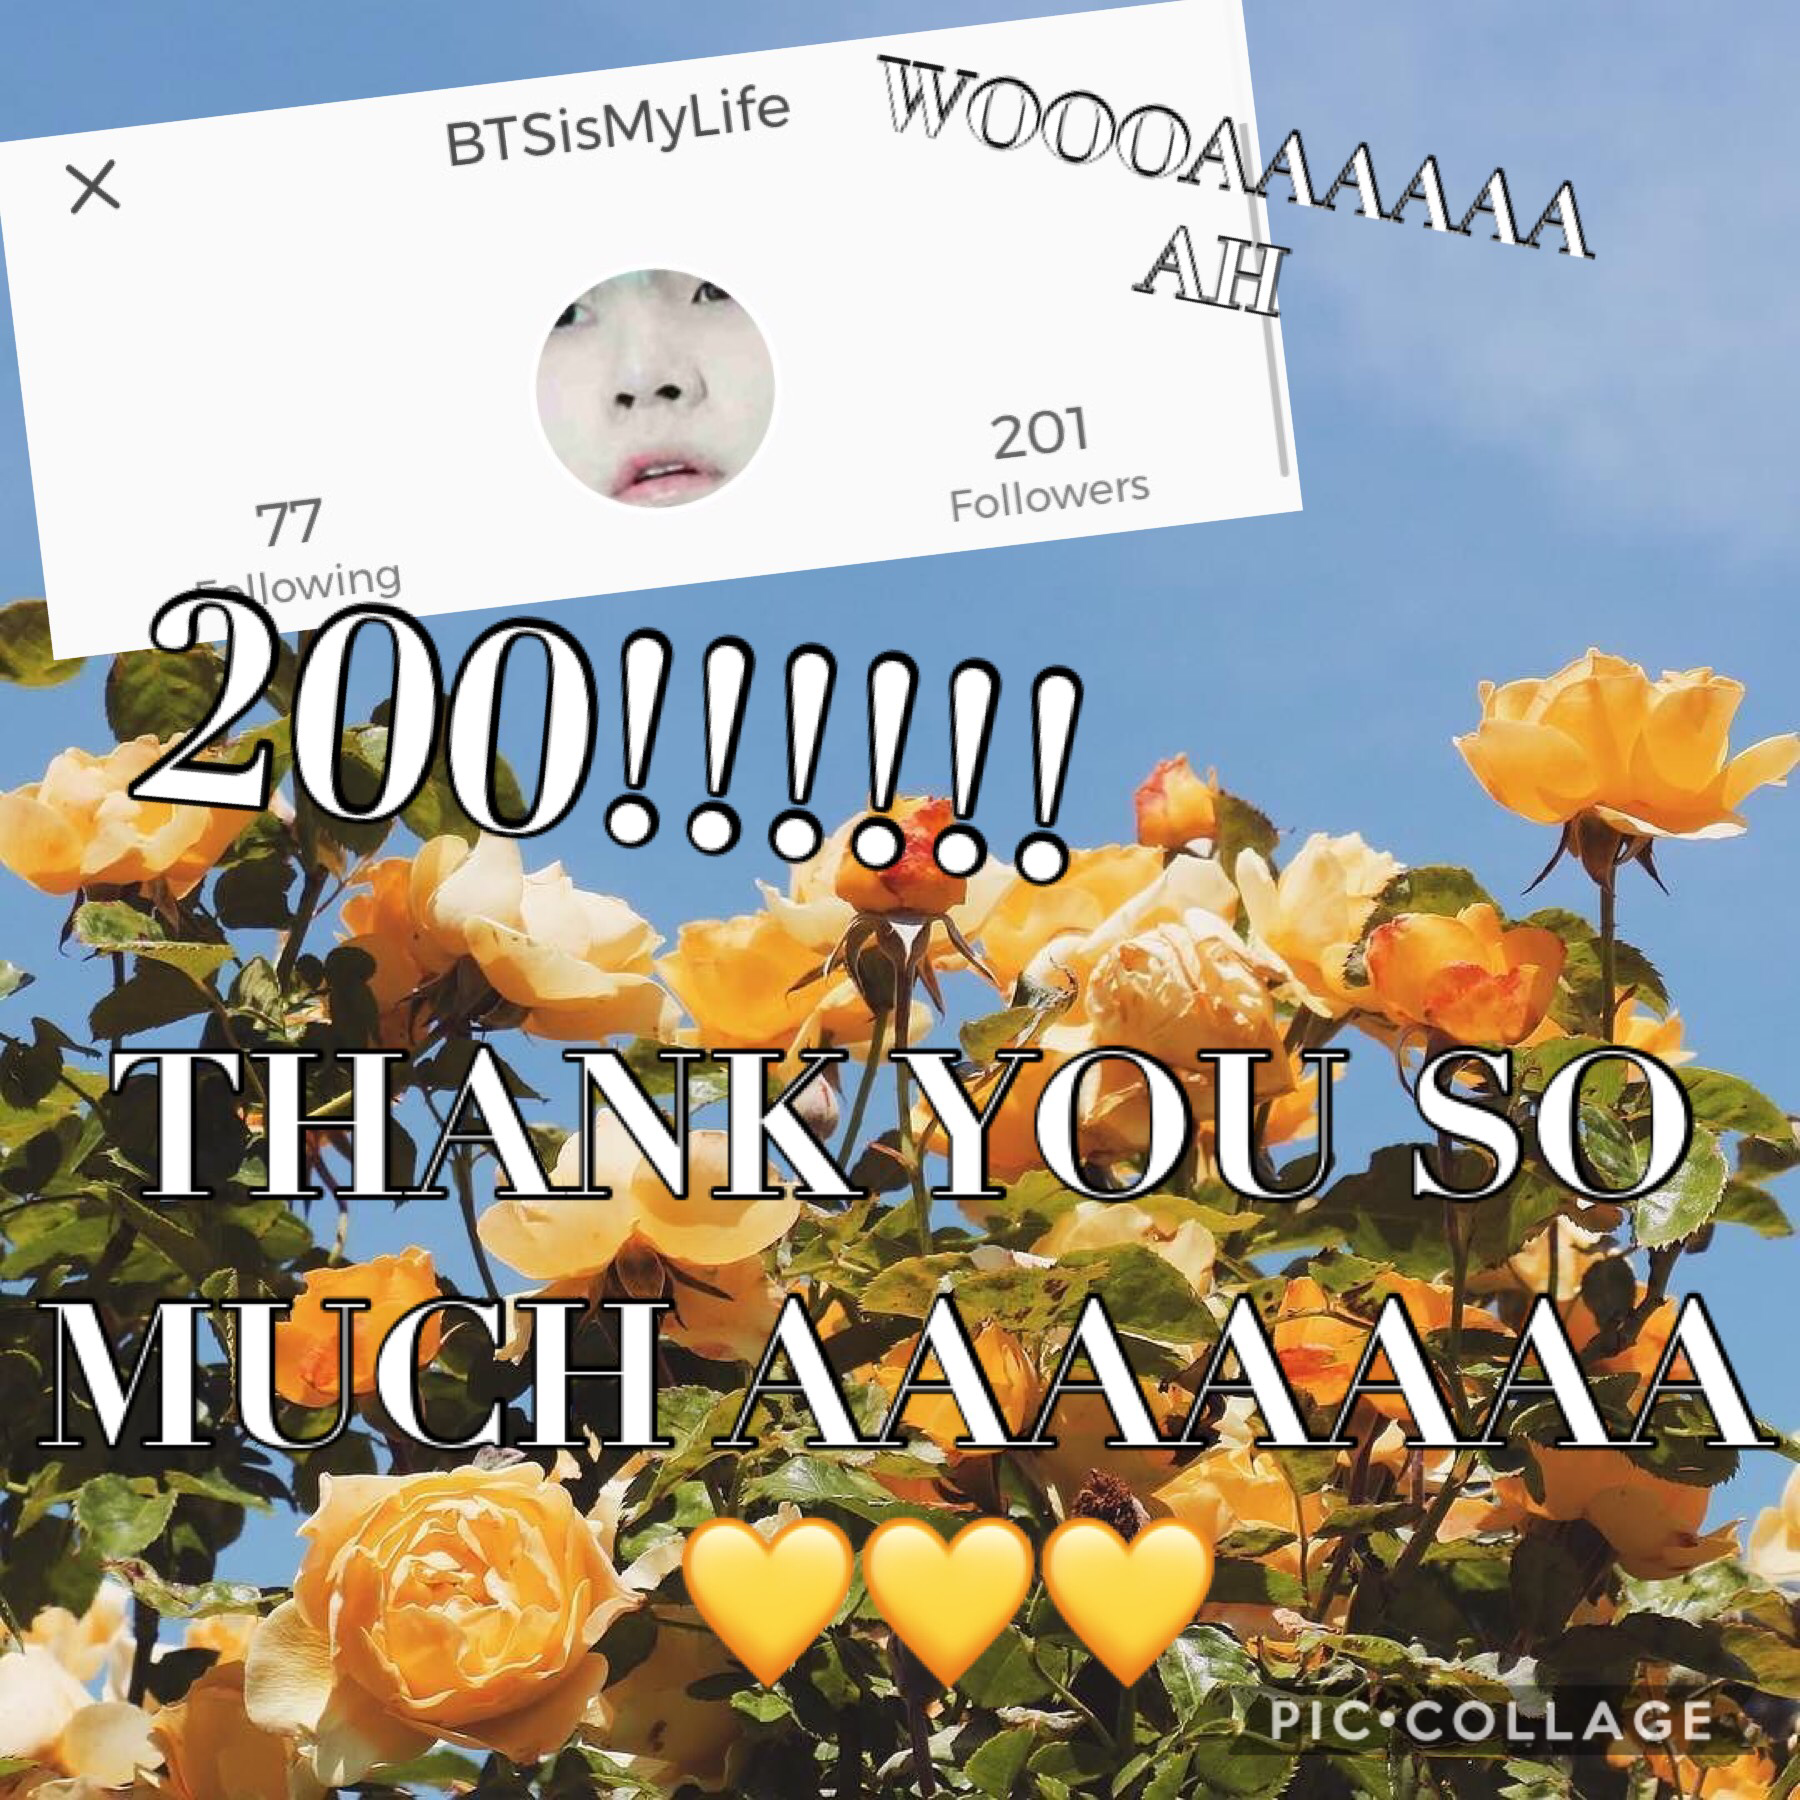 tap

Thank you thank you thank you so much to everyone who follows me and likes my collages and supports me, it really means so much to me 💜